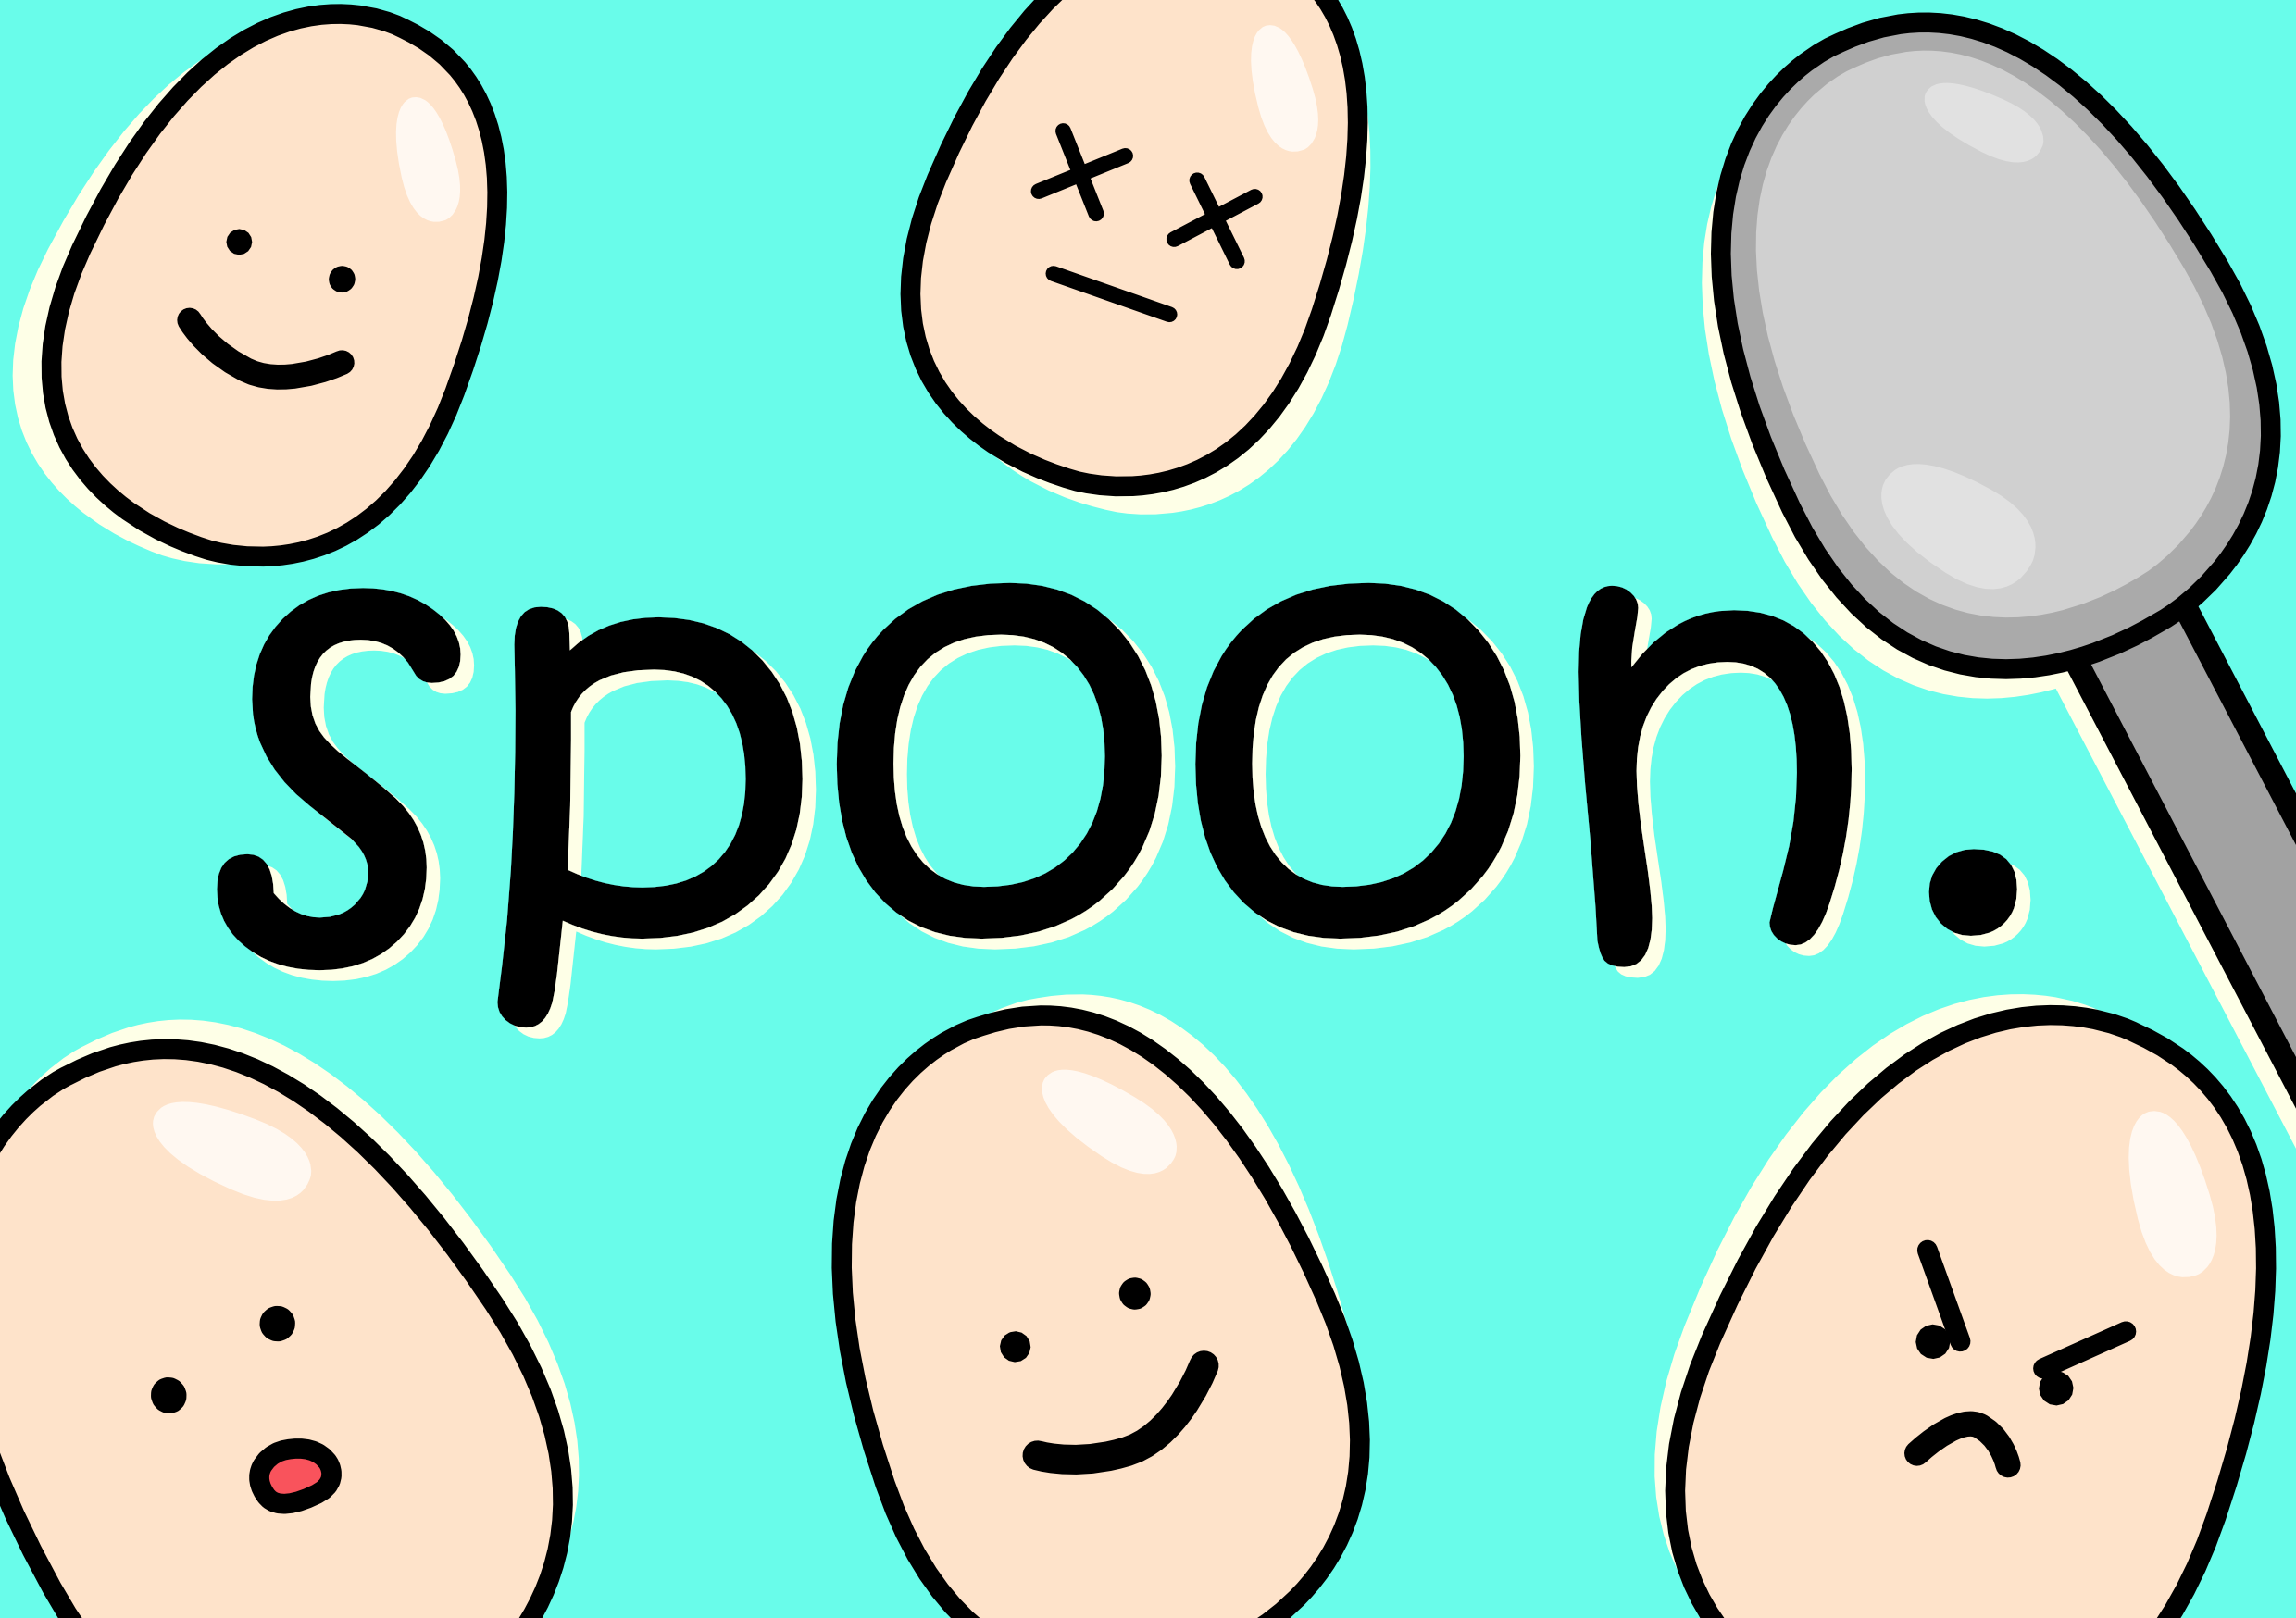 spoon_promo.png